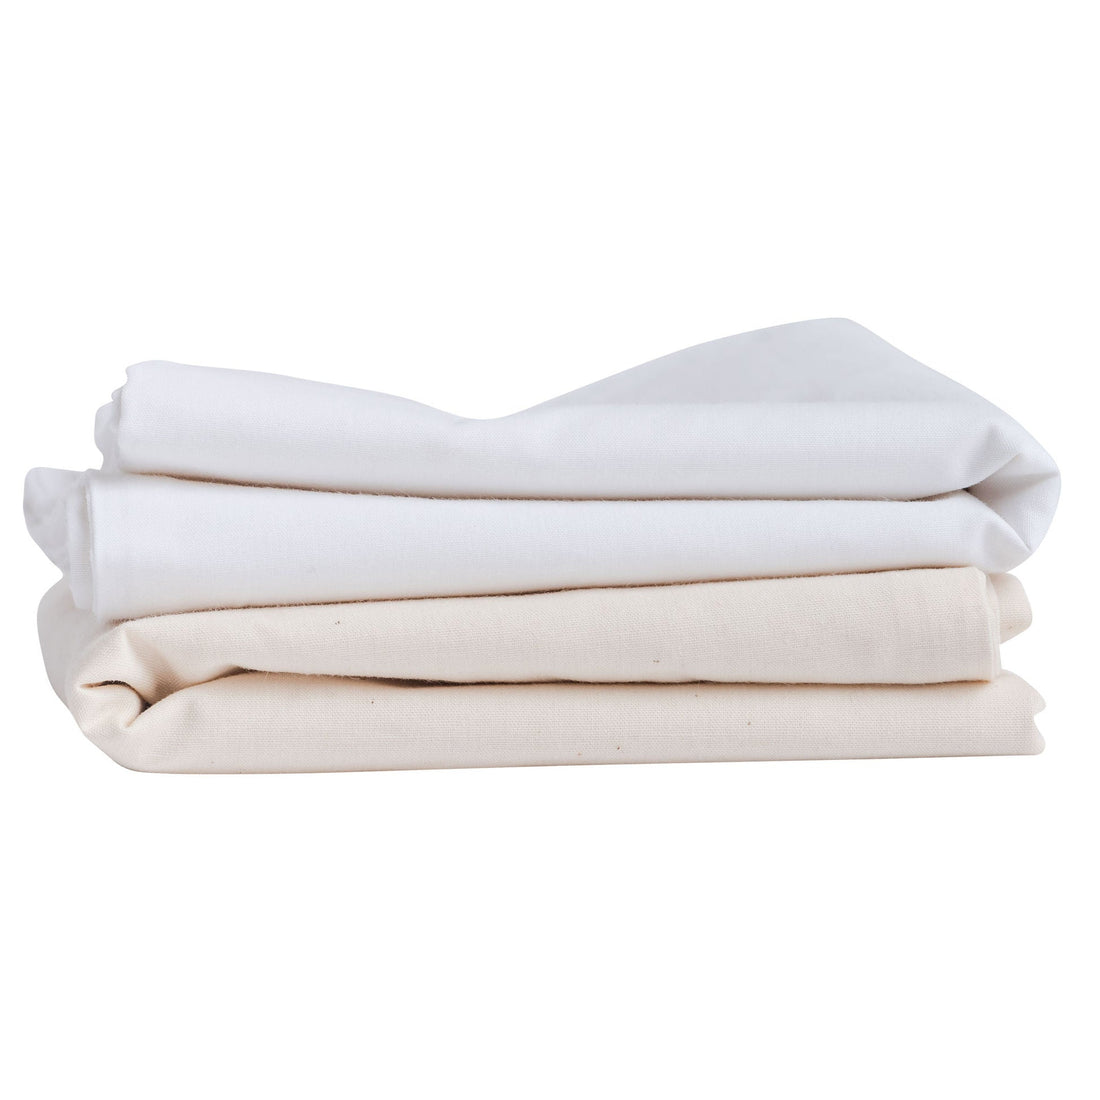 ComfyComfy organic cotton pillowcases made in the USA